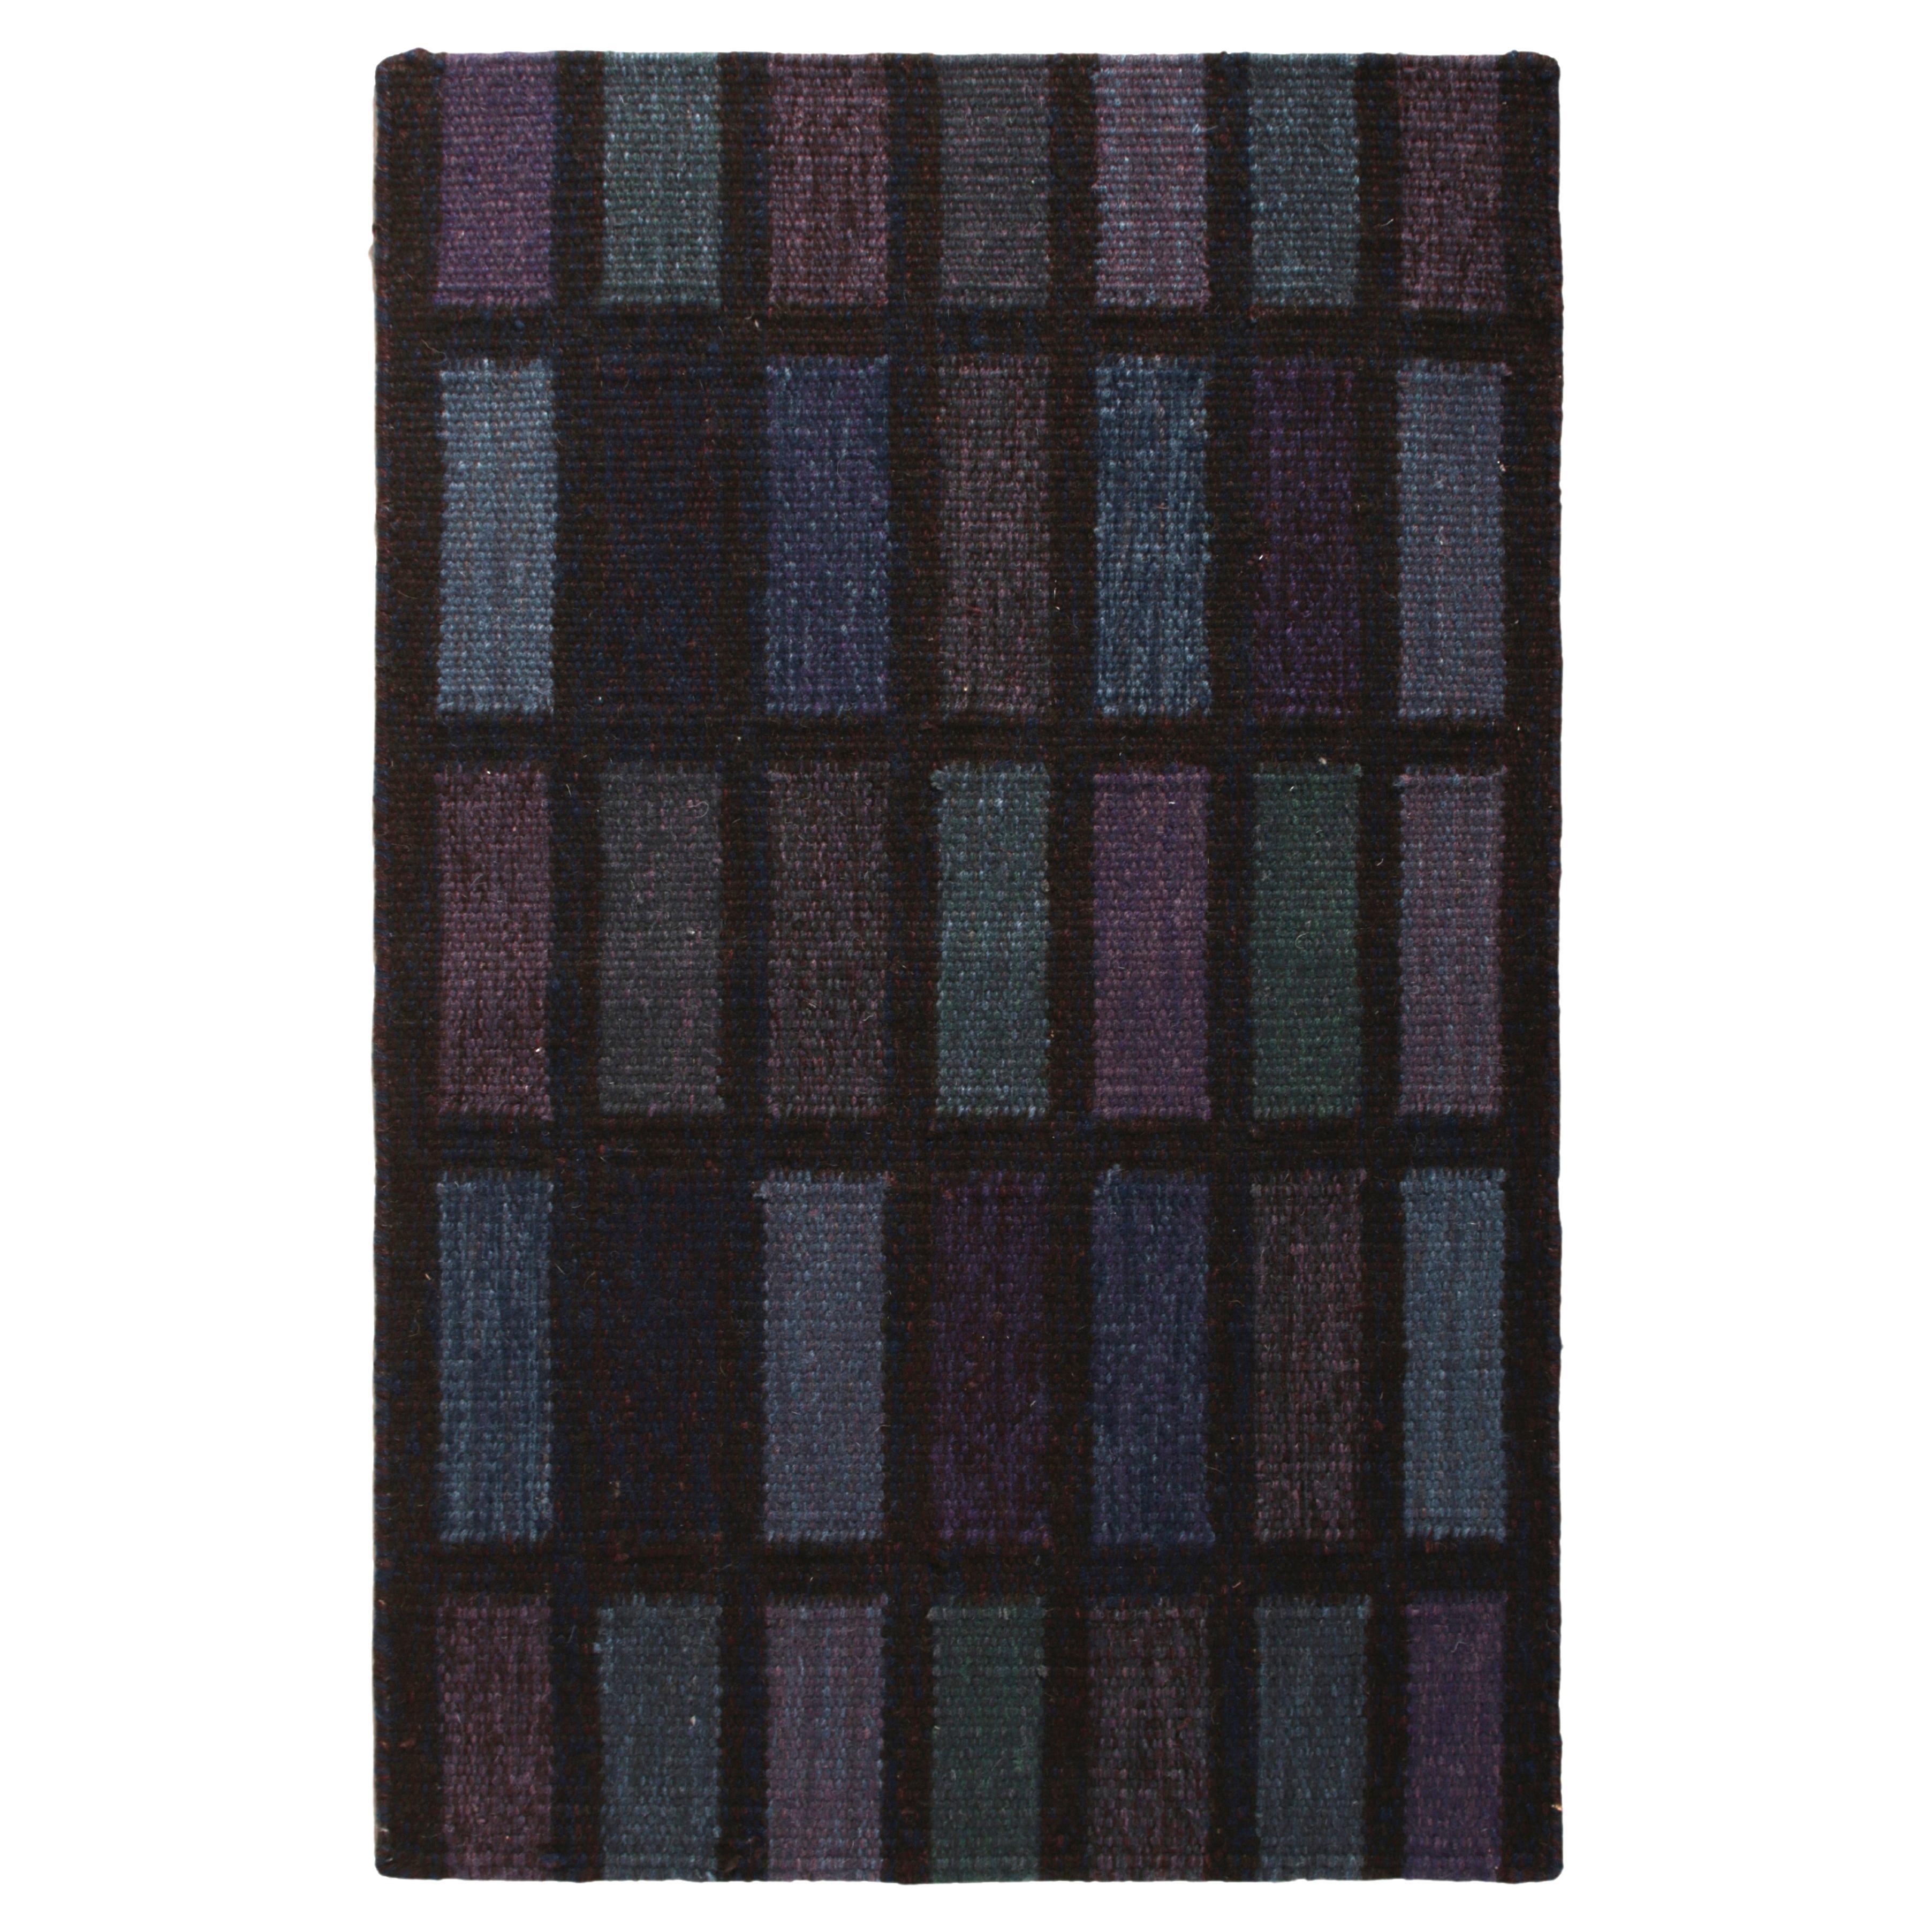 Rug & Kilim’s Scandinavian Style Gift-Size Kilim in Purple and Blue Patterns